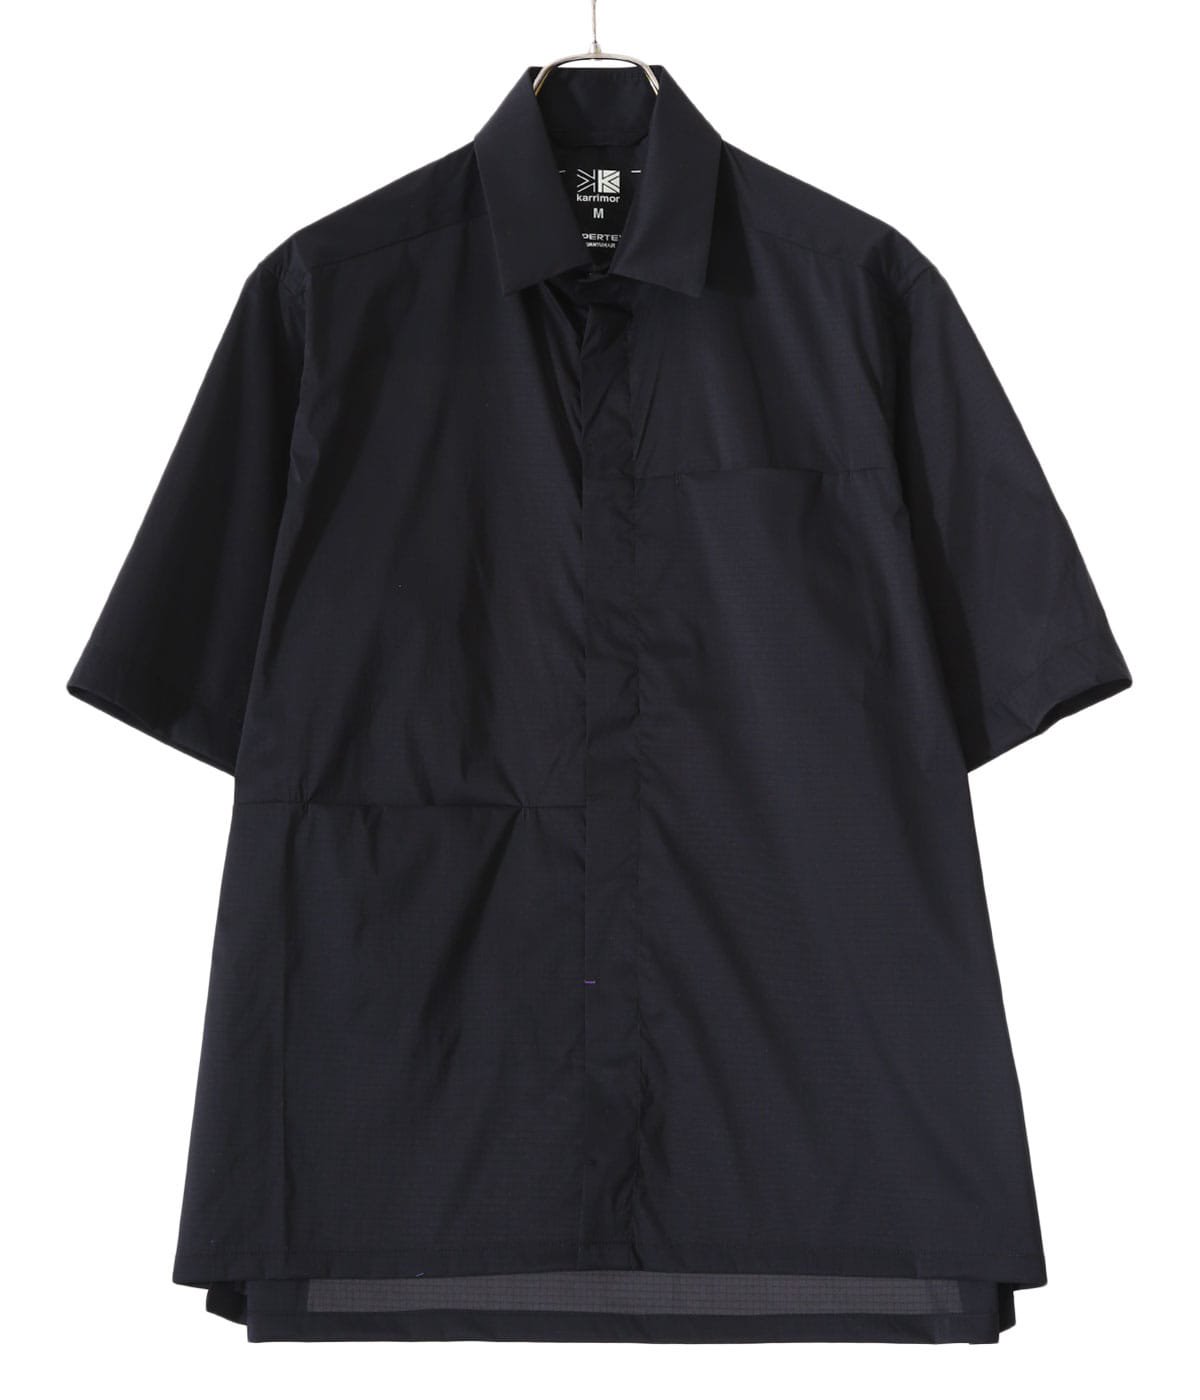 breathable S/S shirts